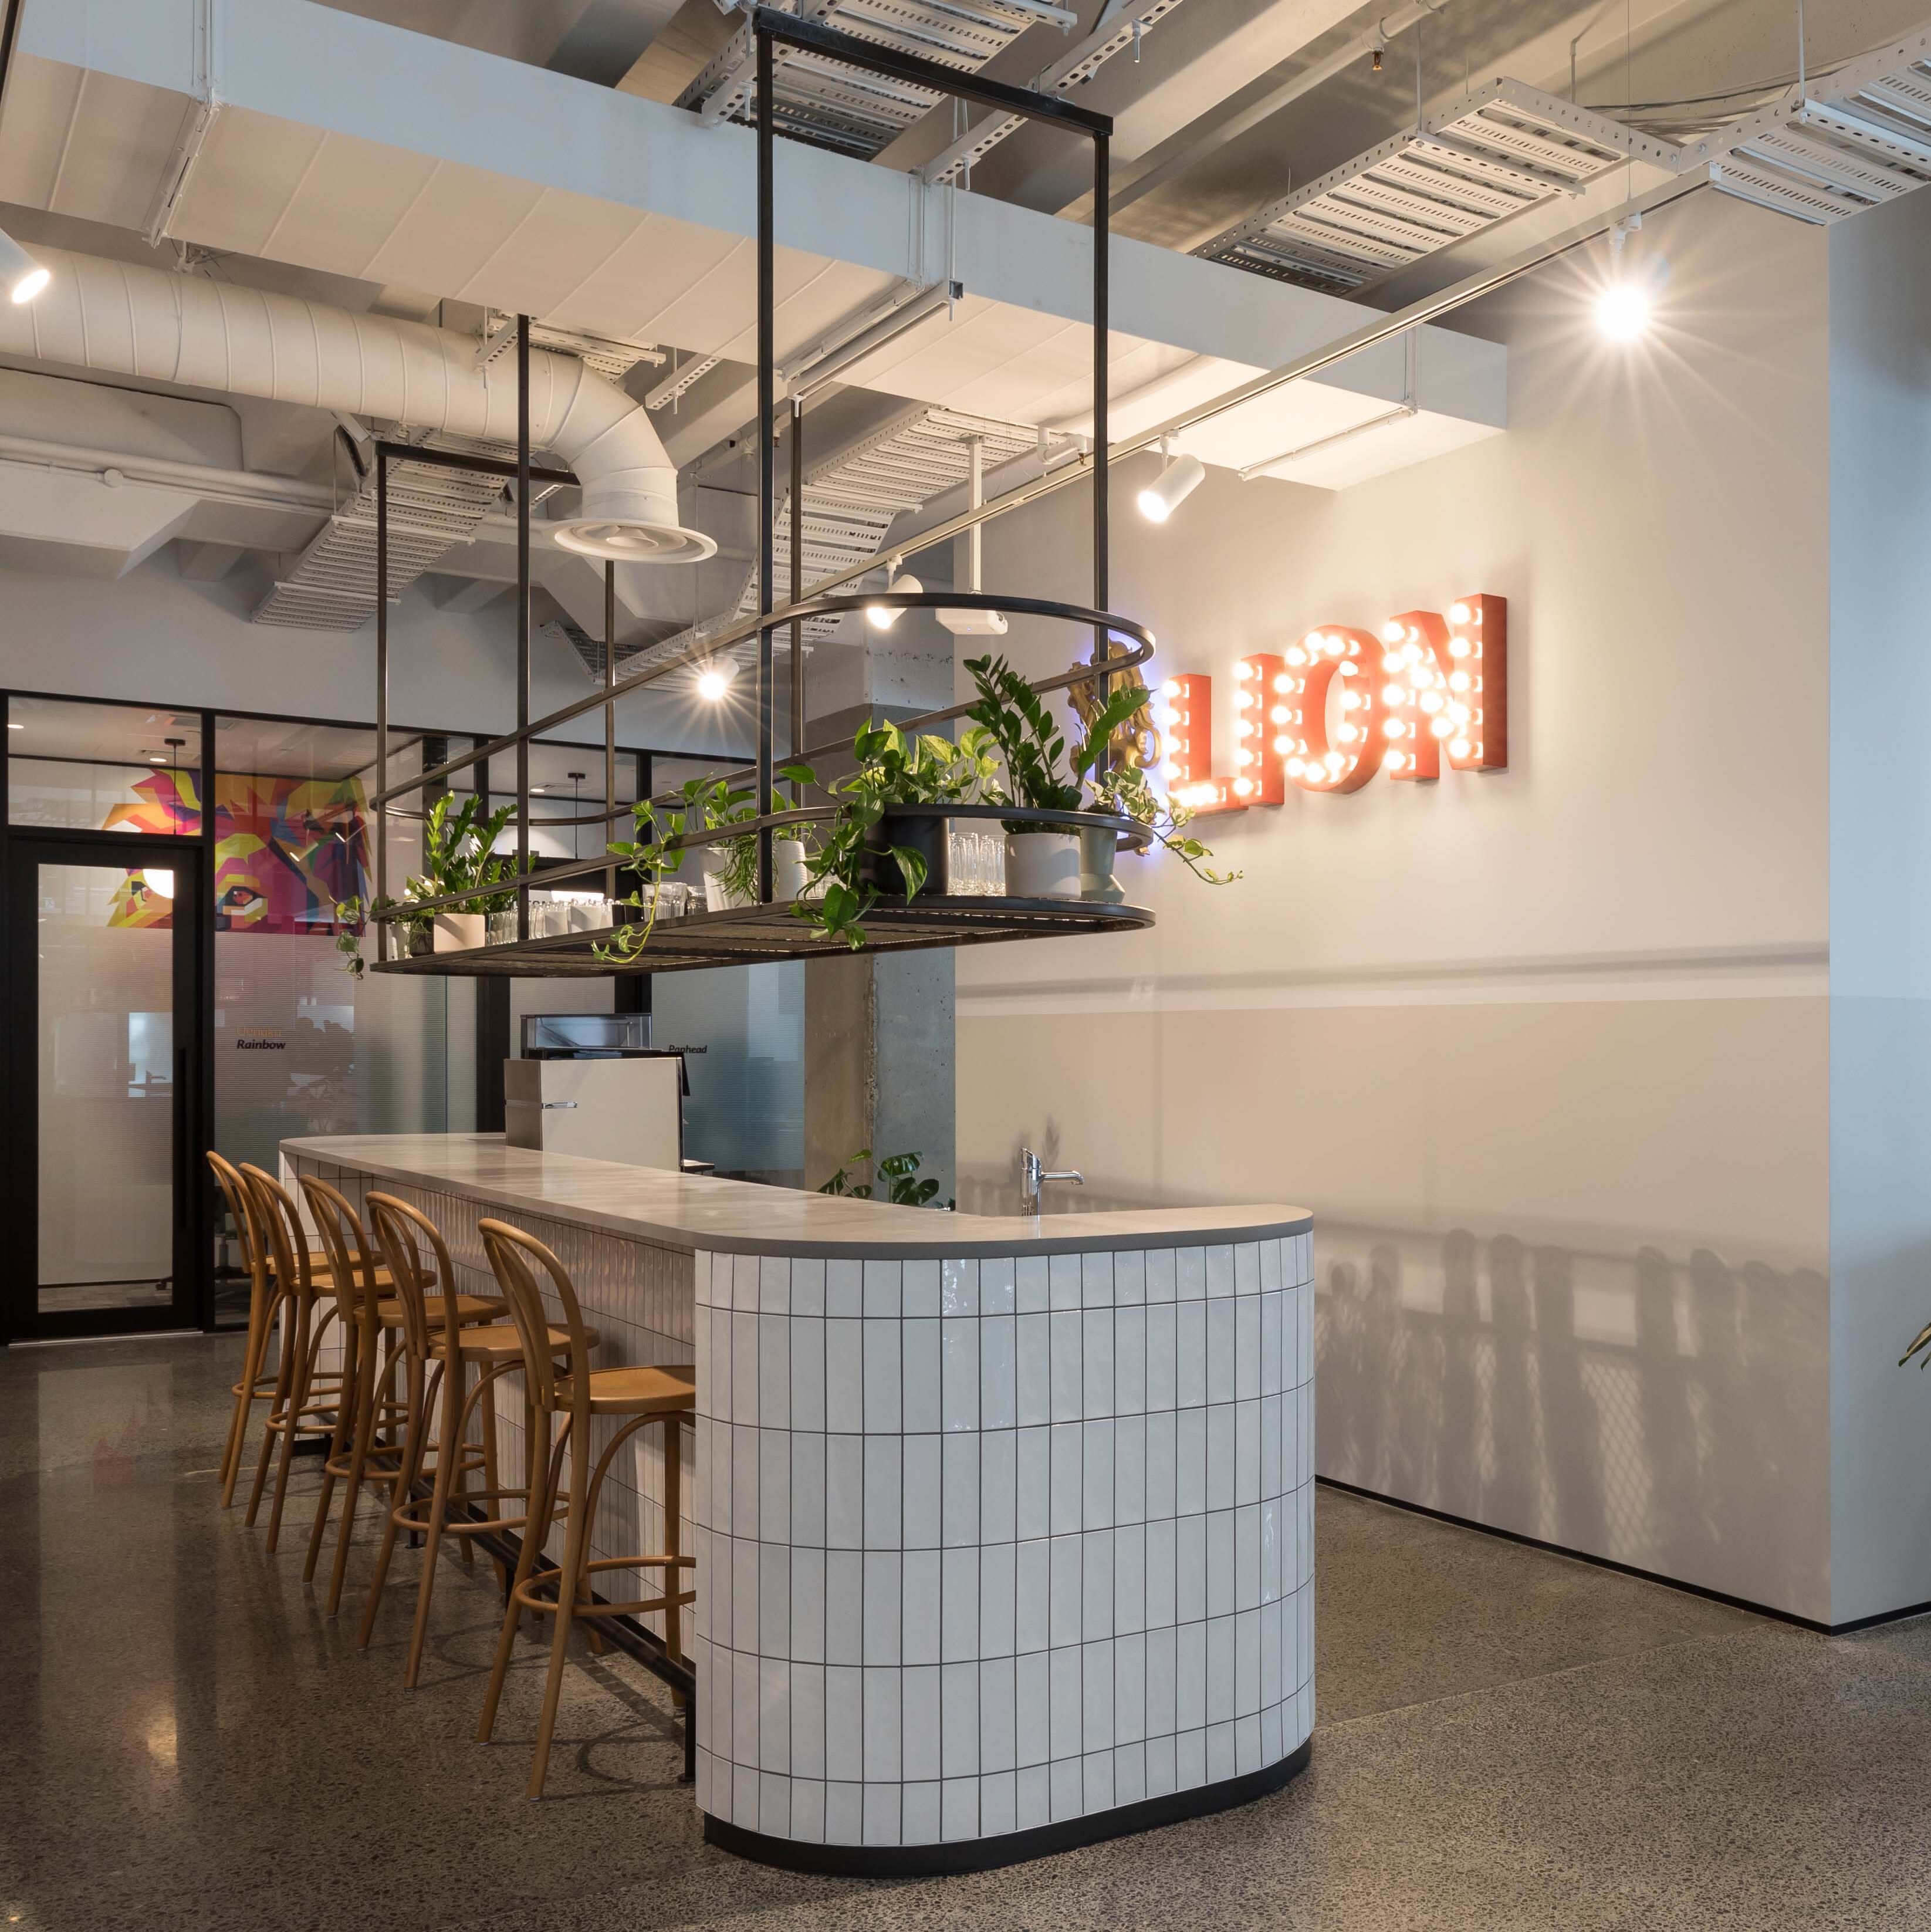 Lion HQ in Auckland with a fun and social interior vibe.